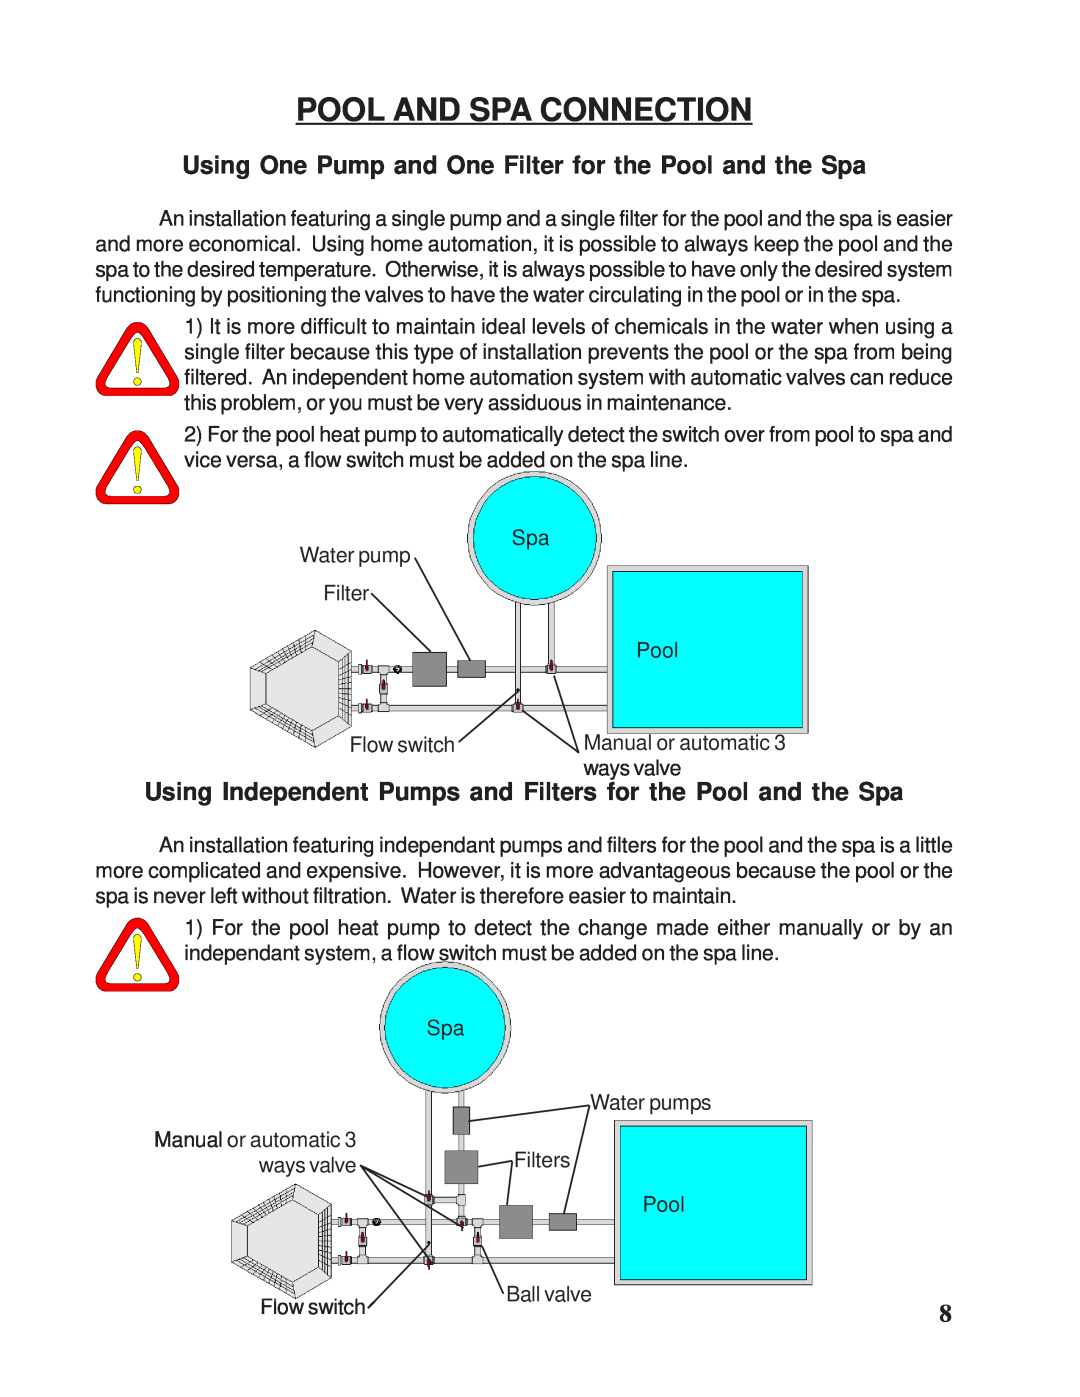 Taylor Pool Heat Pump owner manual Pool And Spa Connection, Using One Pump and One Filter for the Pool and the Spa 